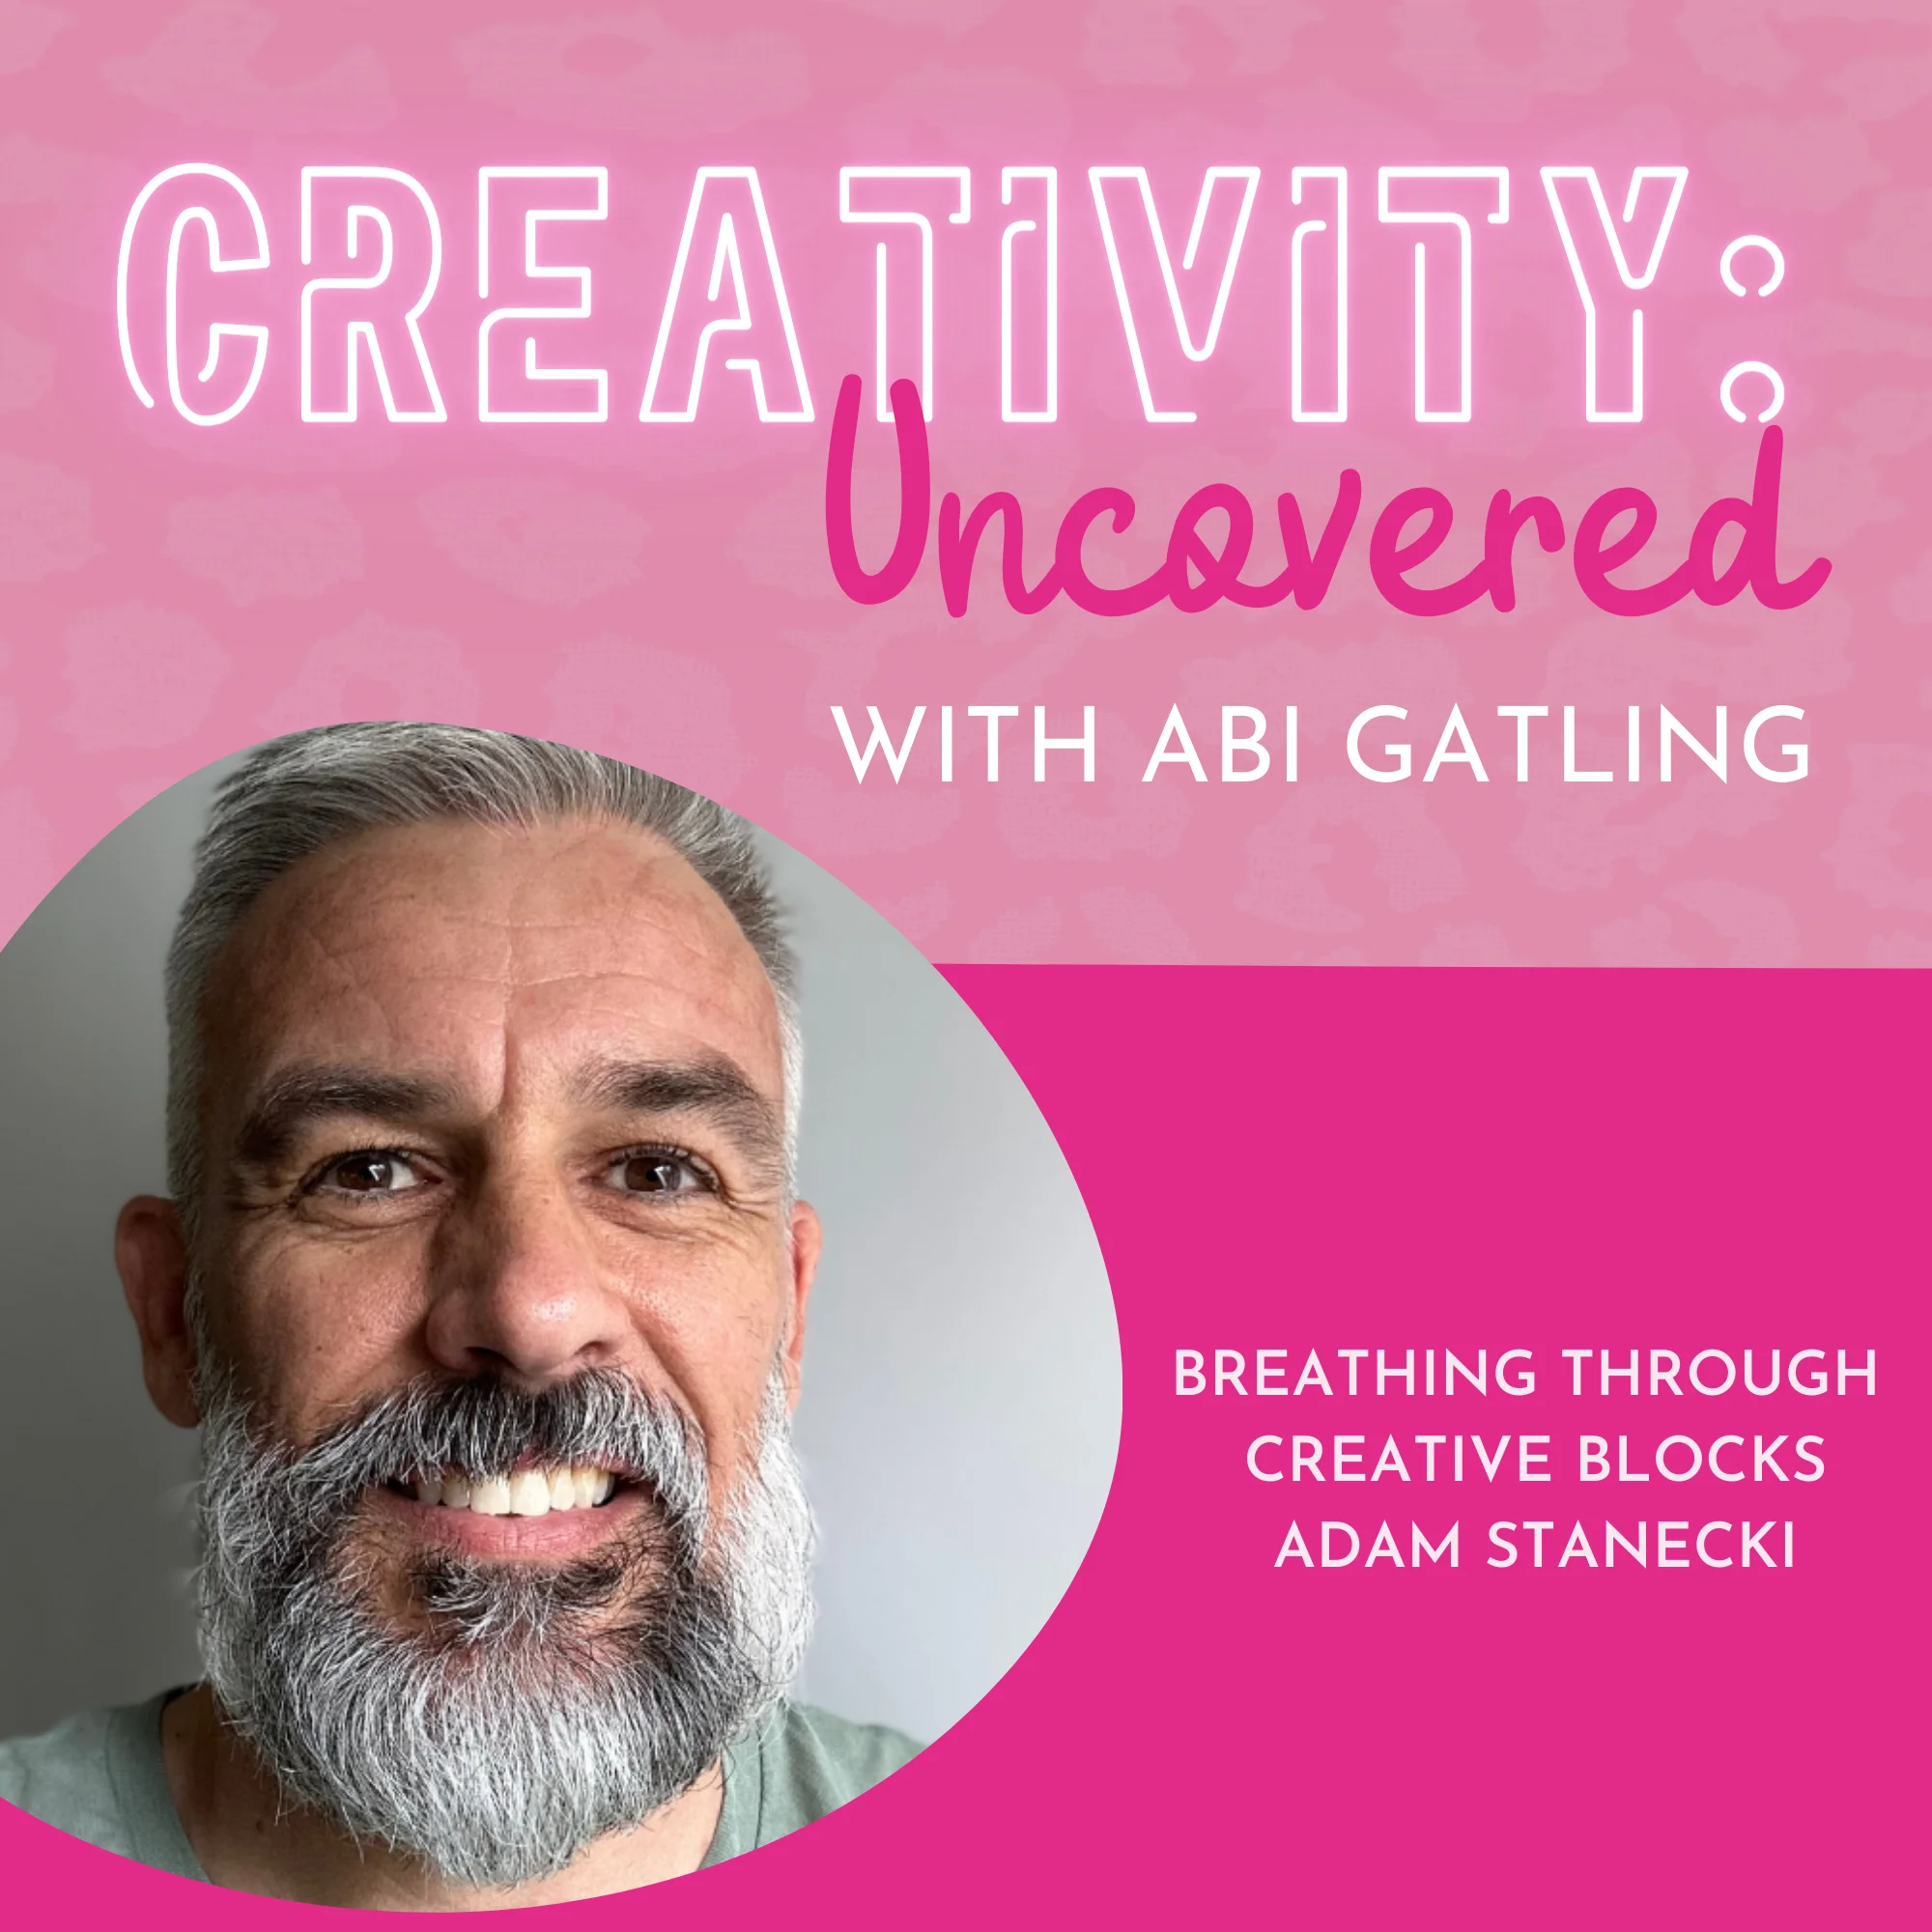 Creativity: Uncovered podcast episode graphic featuring guest Adam Stanecki